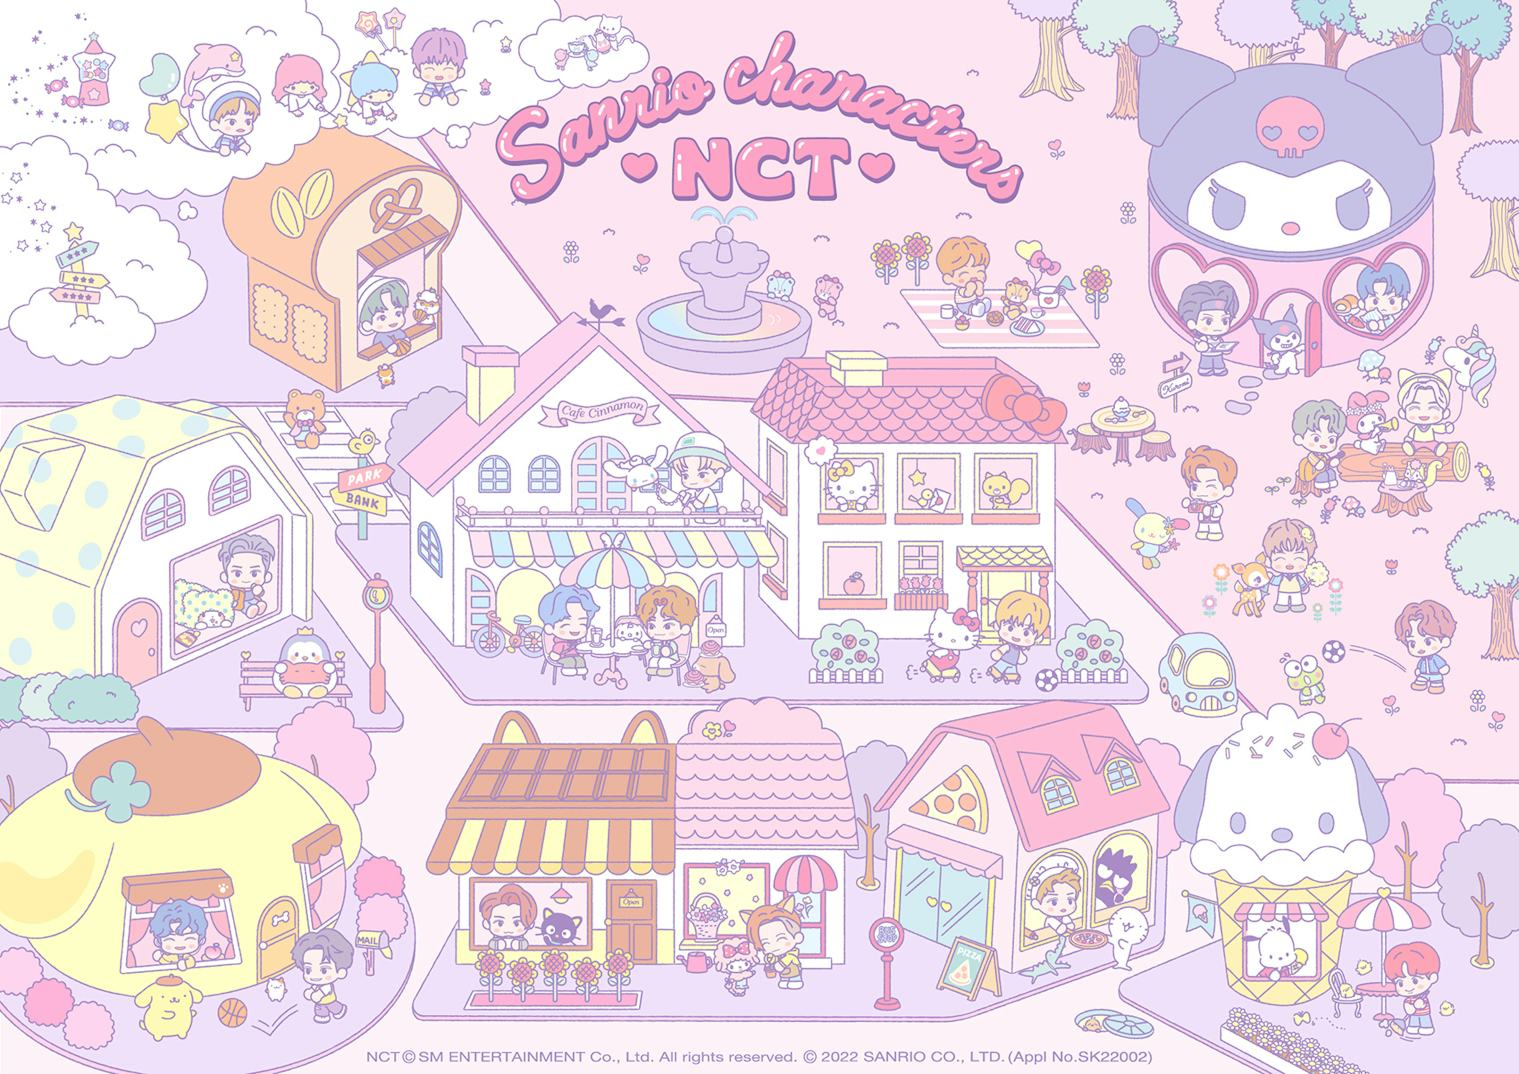 How to Buy NCT & Sanrio's Latest Merch Collaboration